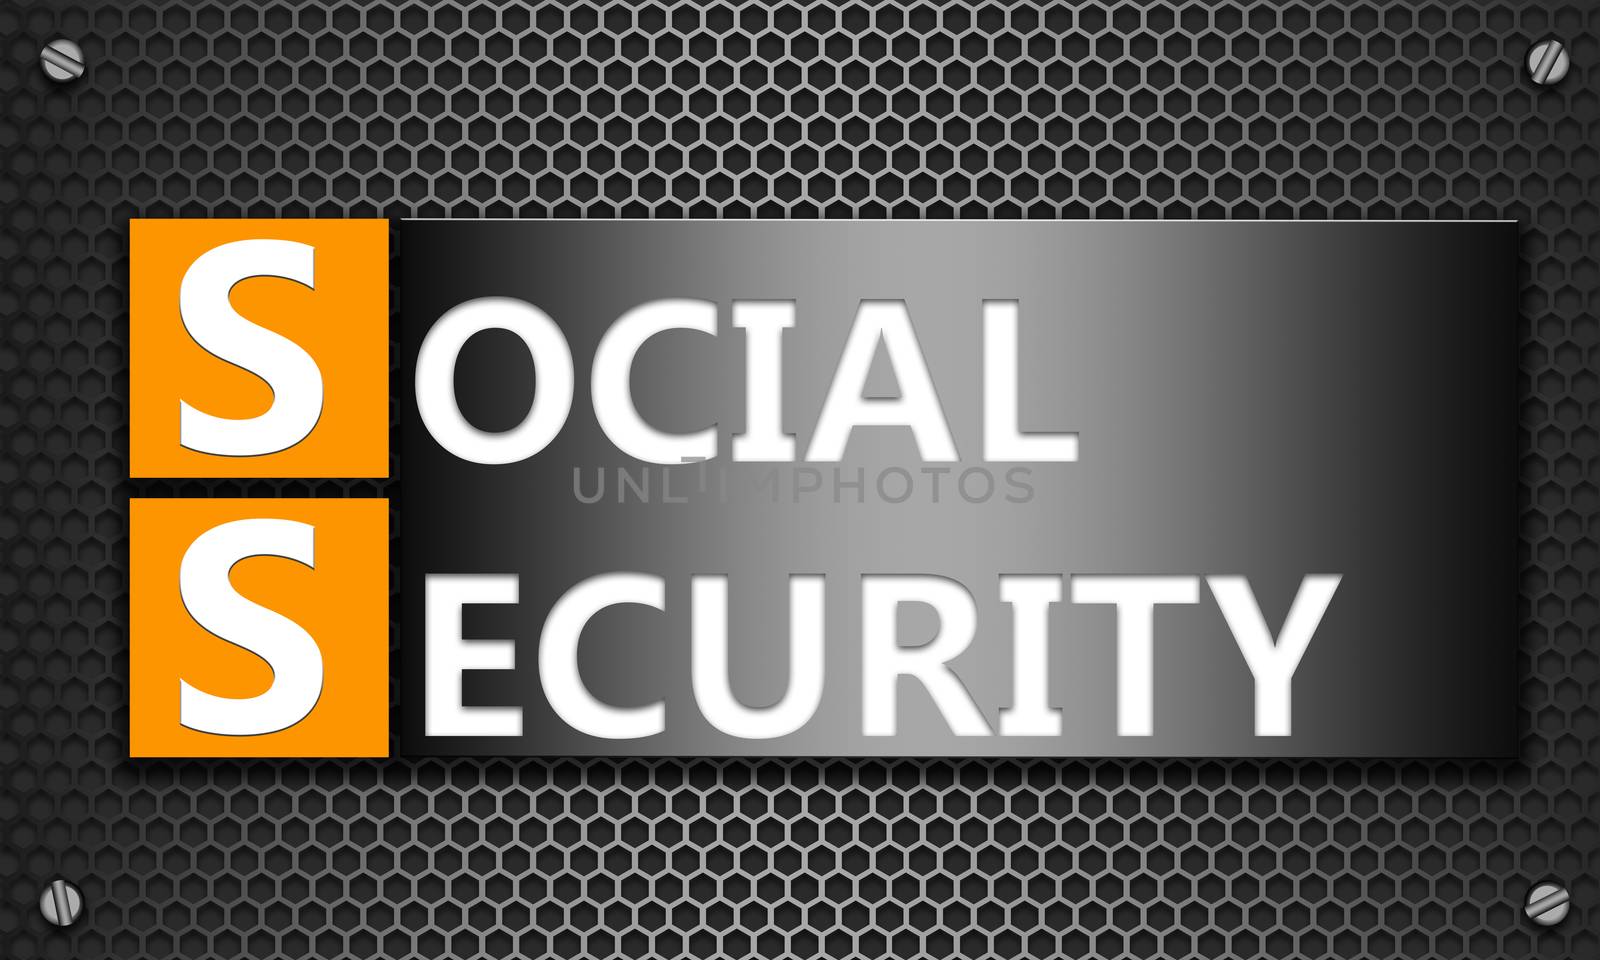 Social security concept on mesh hexagon background, 3d rendering